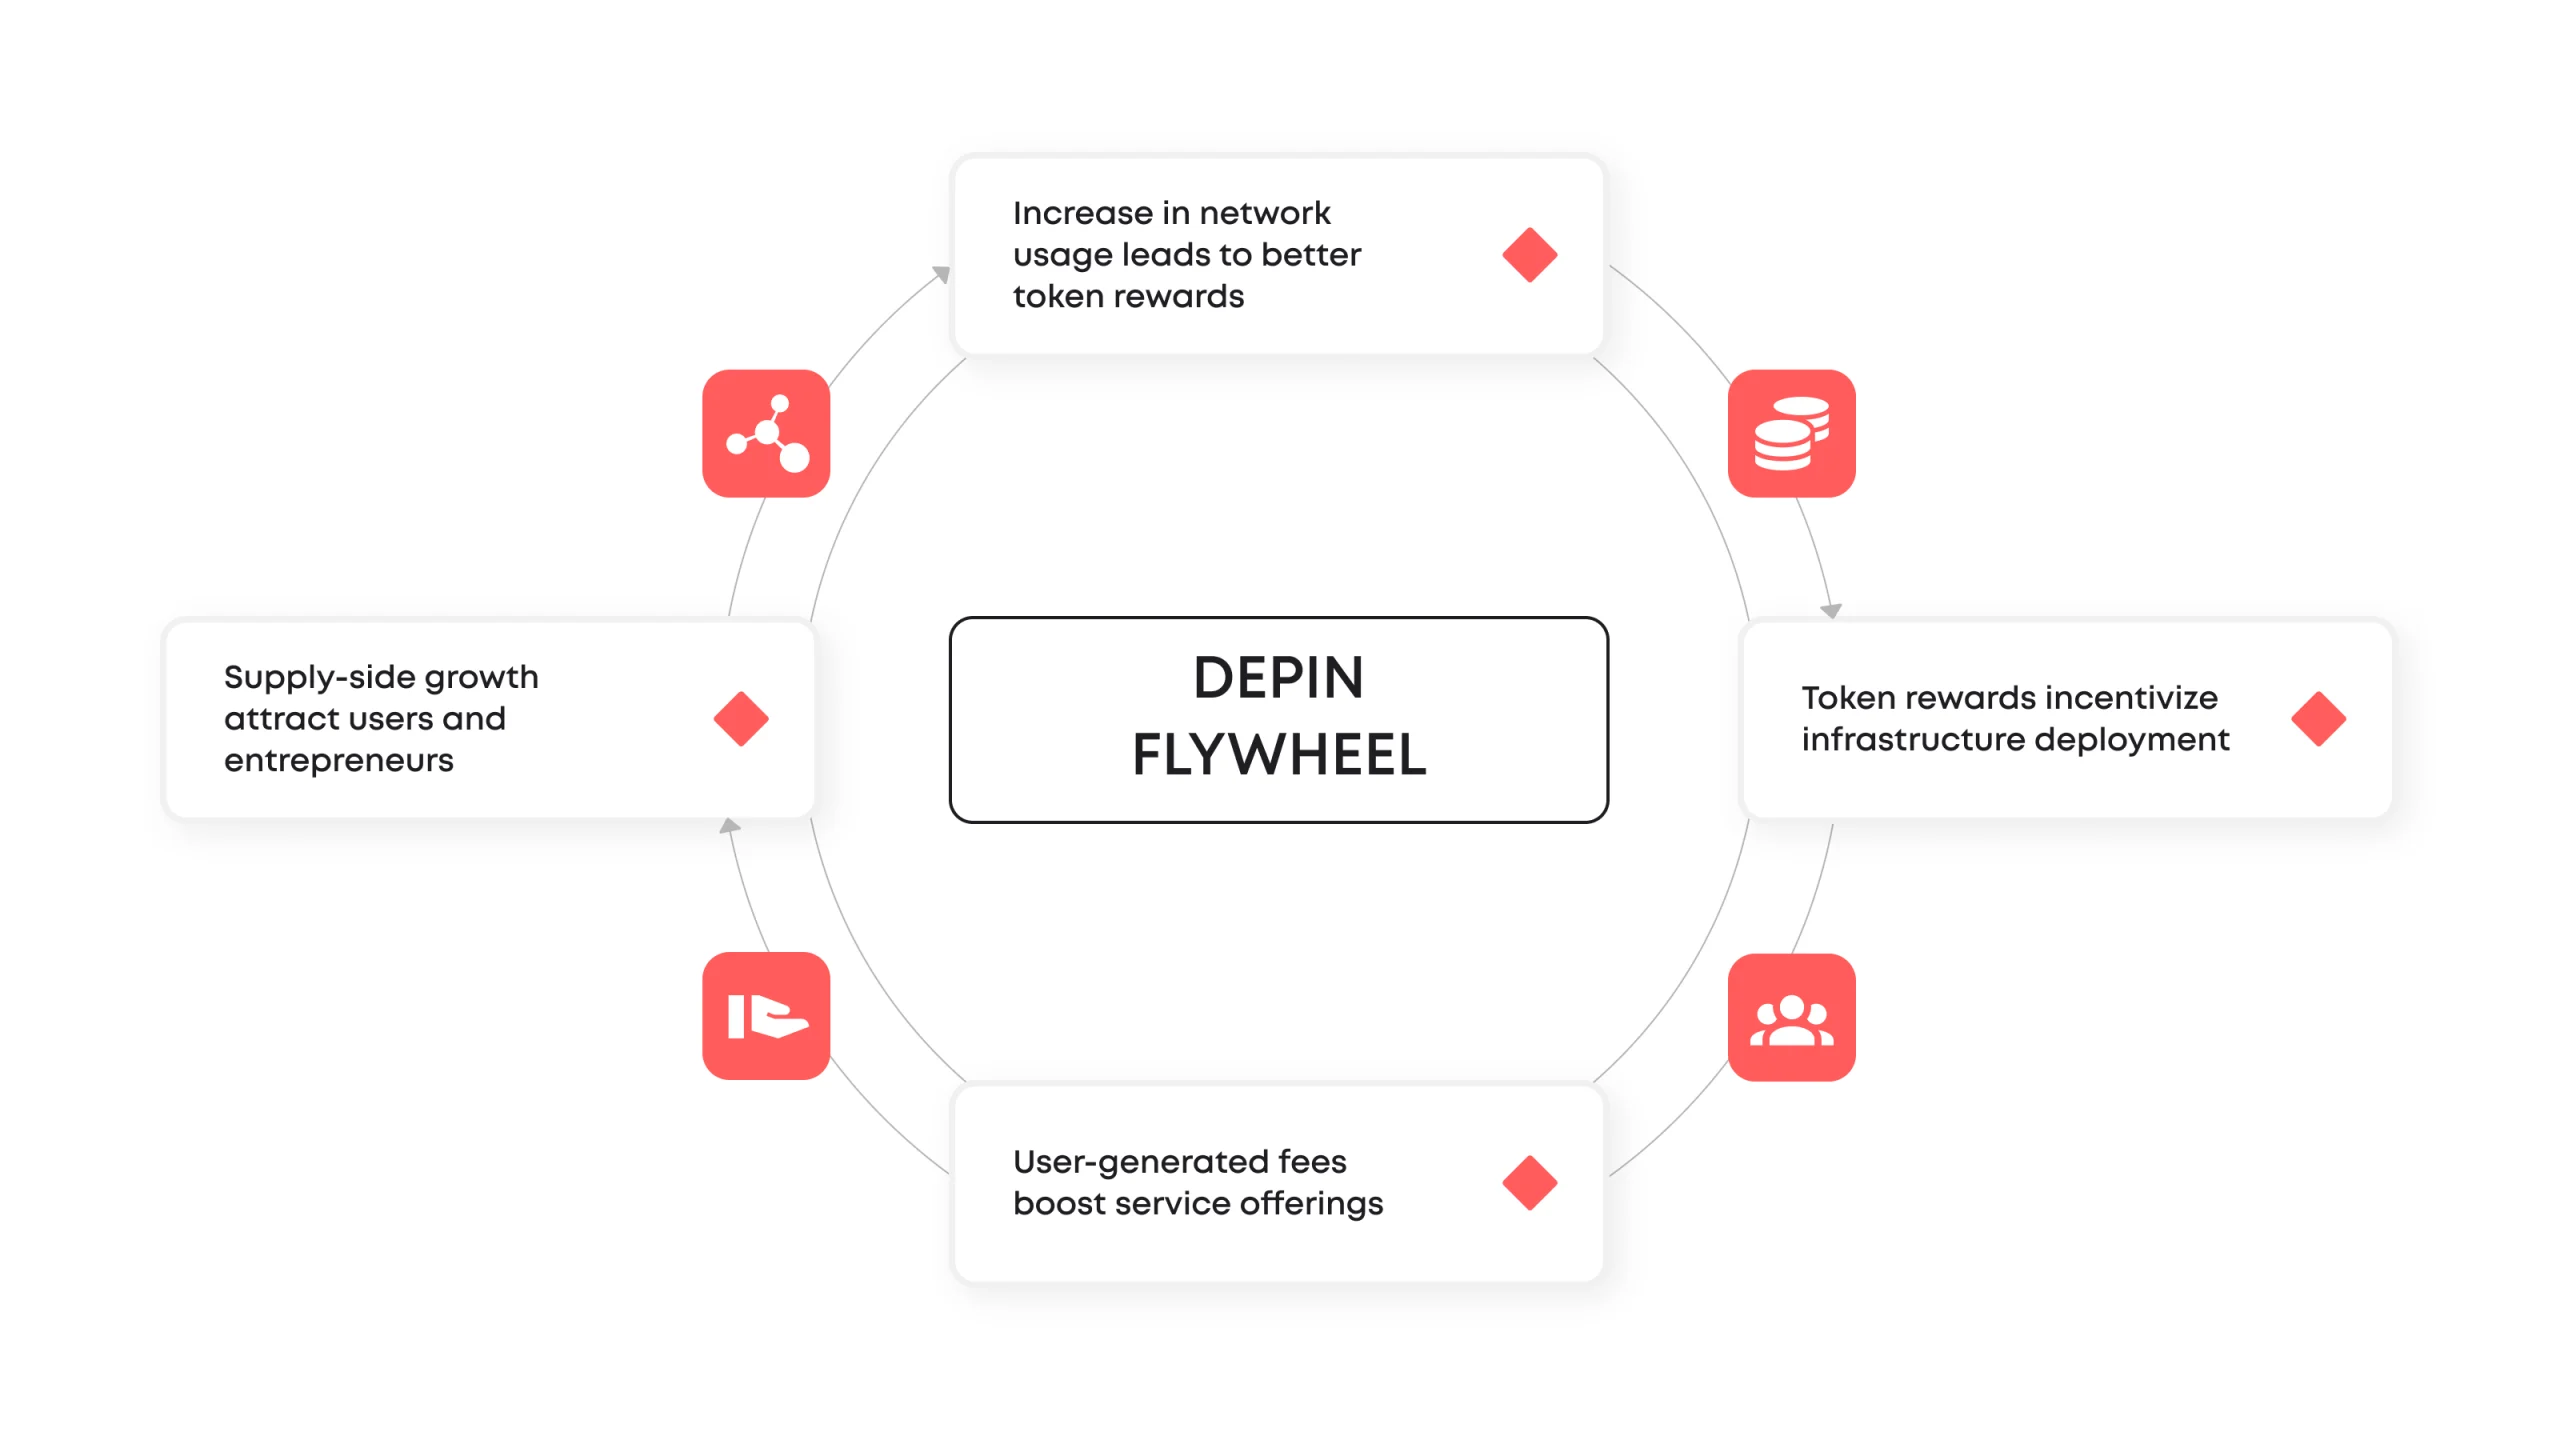 At the heart of DePIN is blockchain technology, which provides a secure, transparent, and immutable ledger for recording transactions and activities